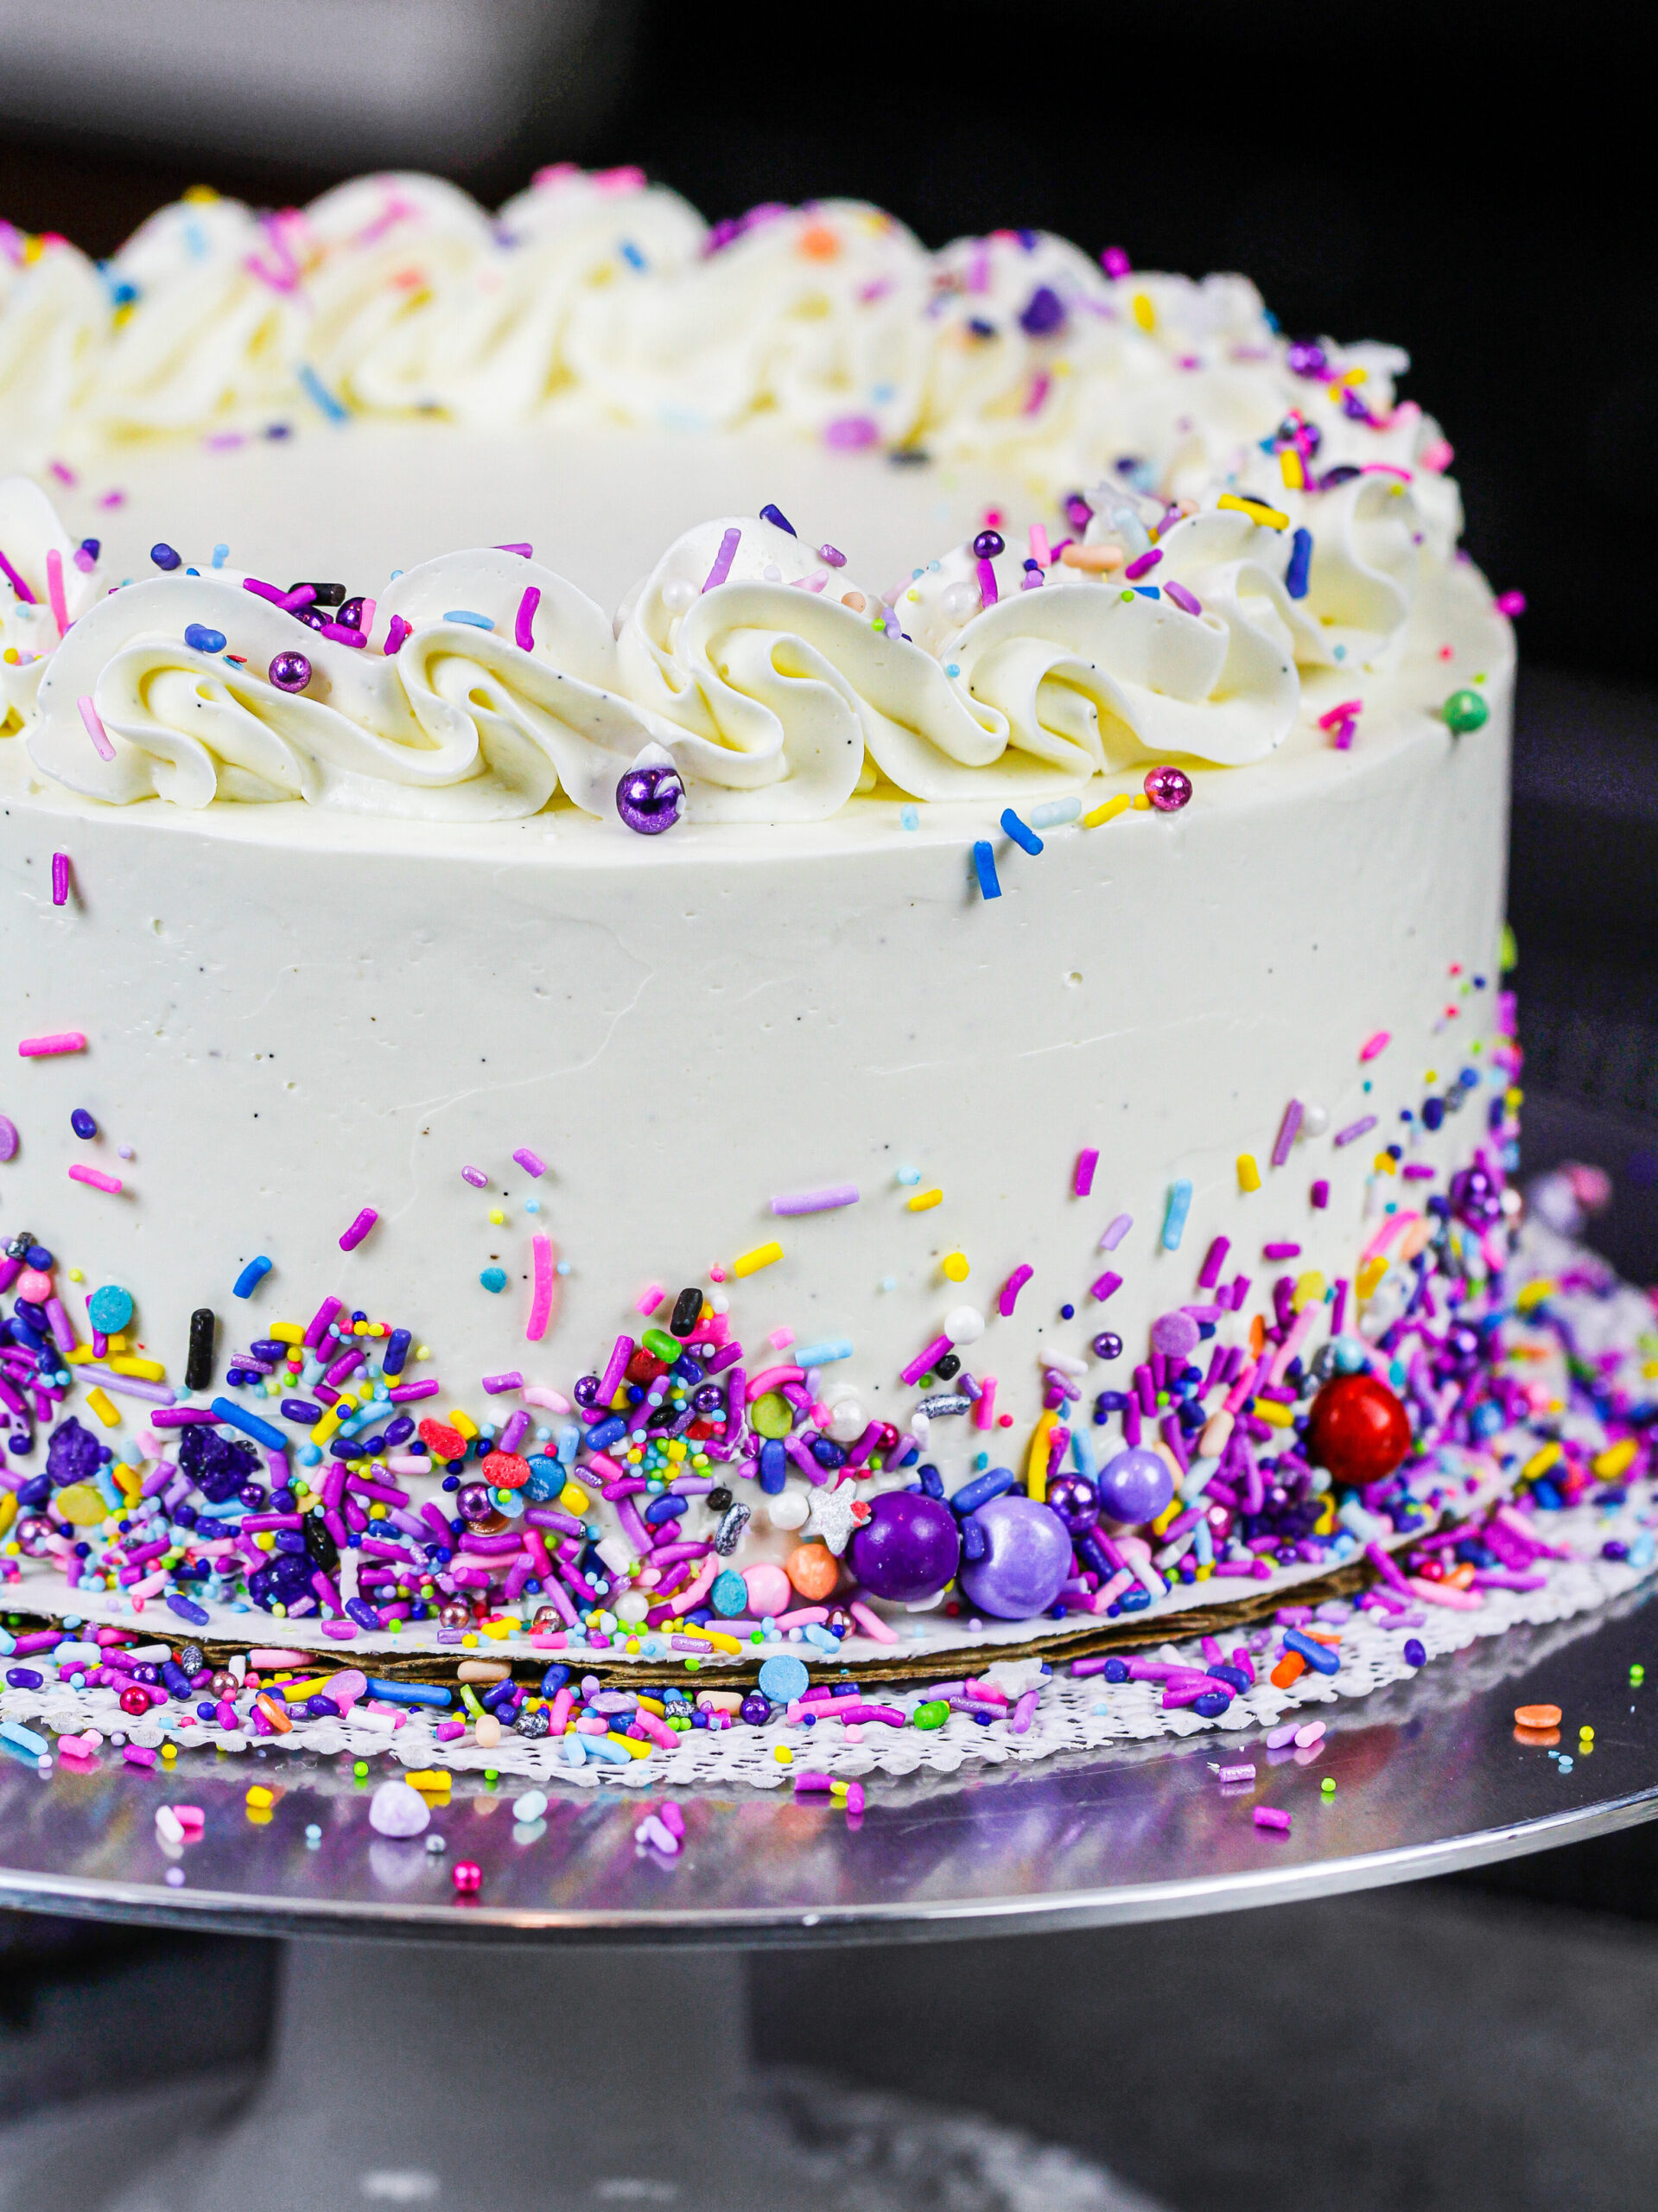 11 Creative Ways To Decorate a Cake Other Than Frosting - Bakingo Blog